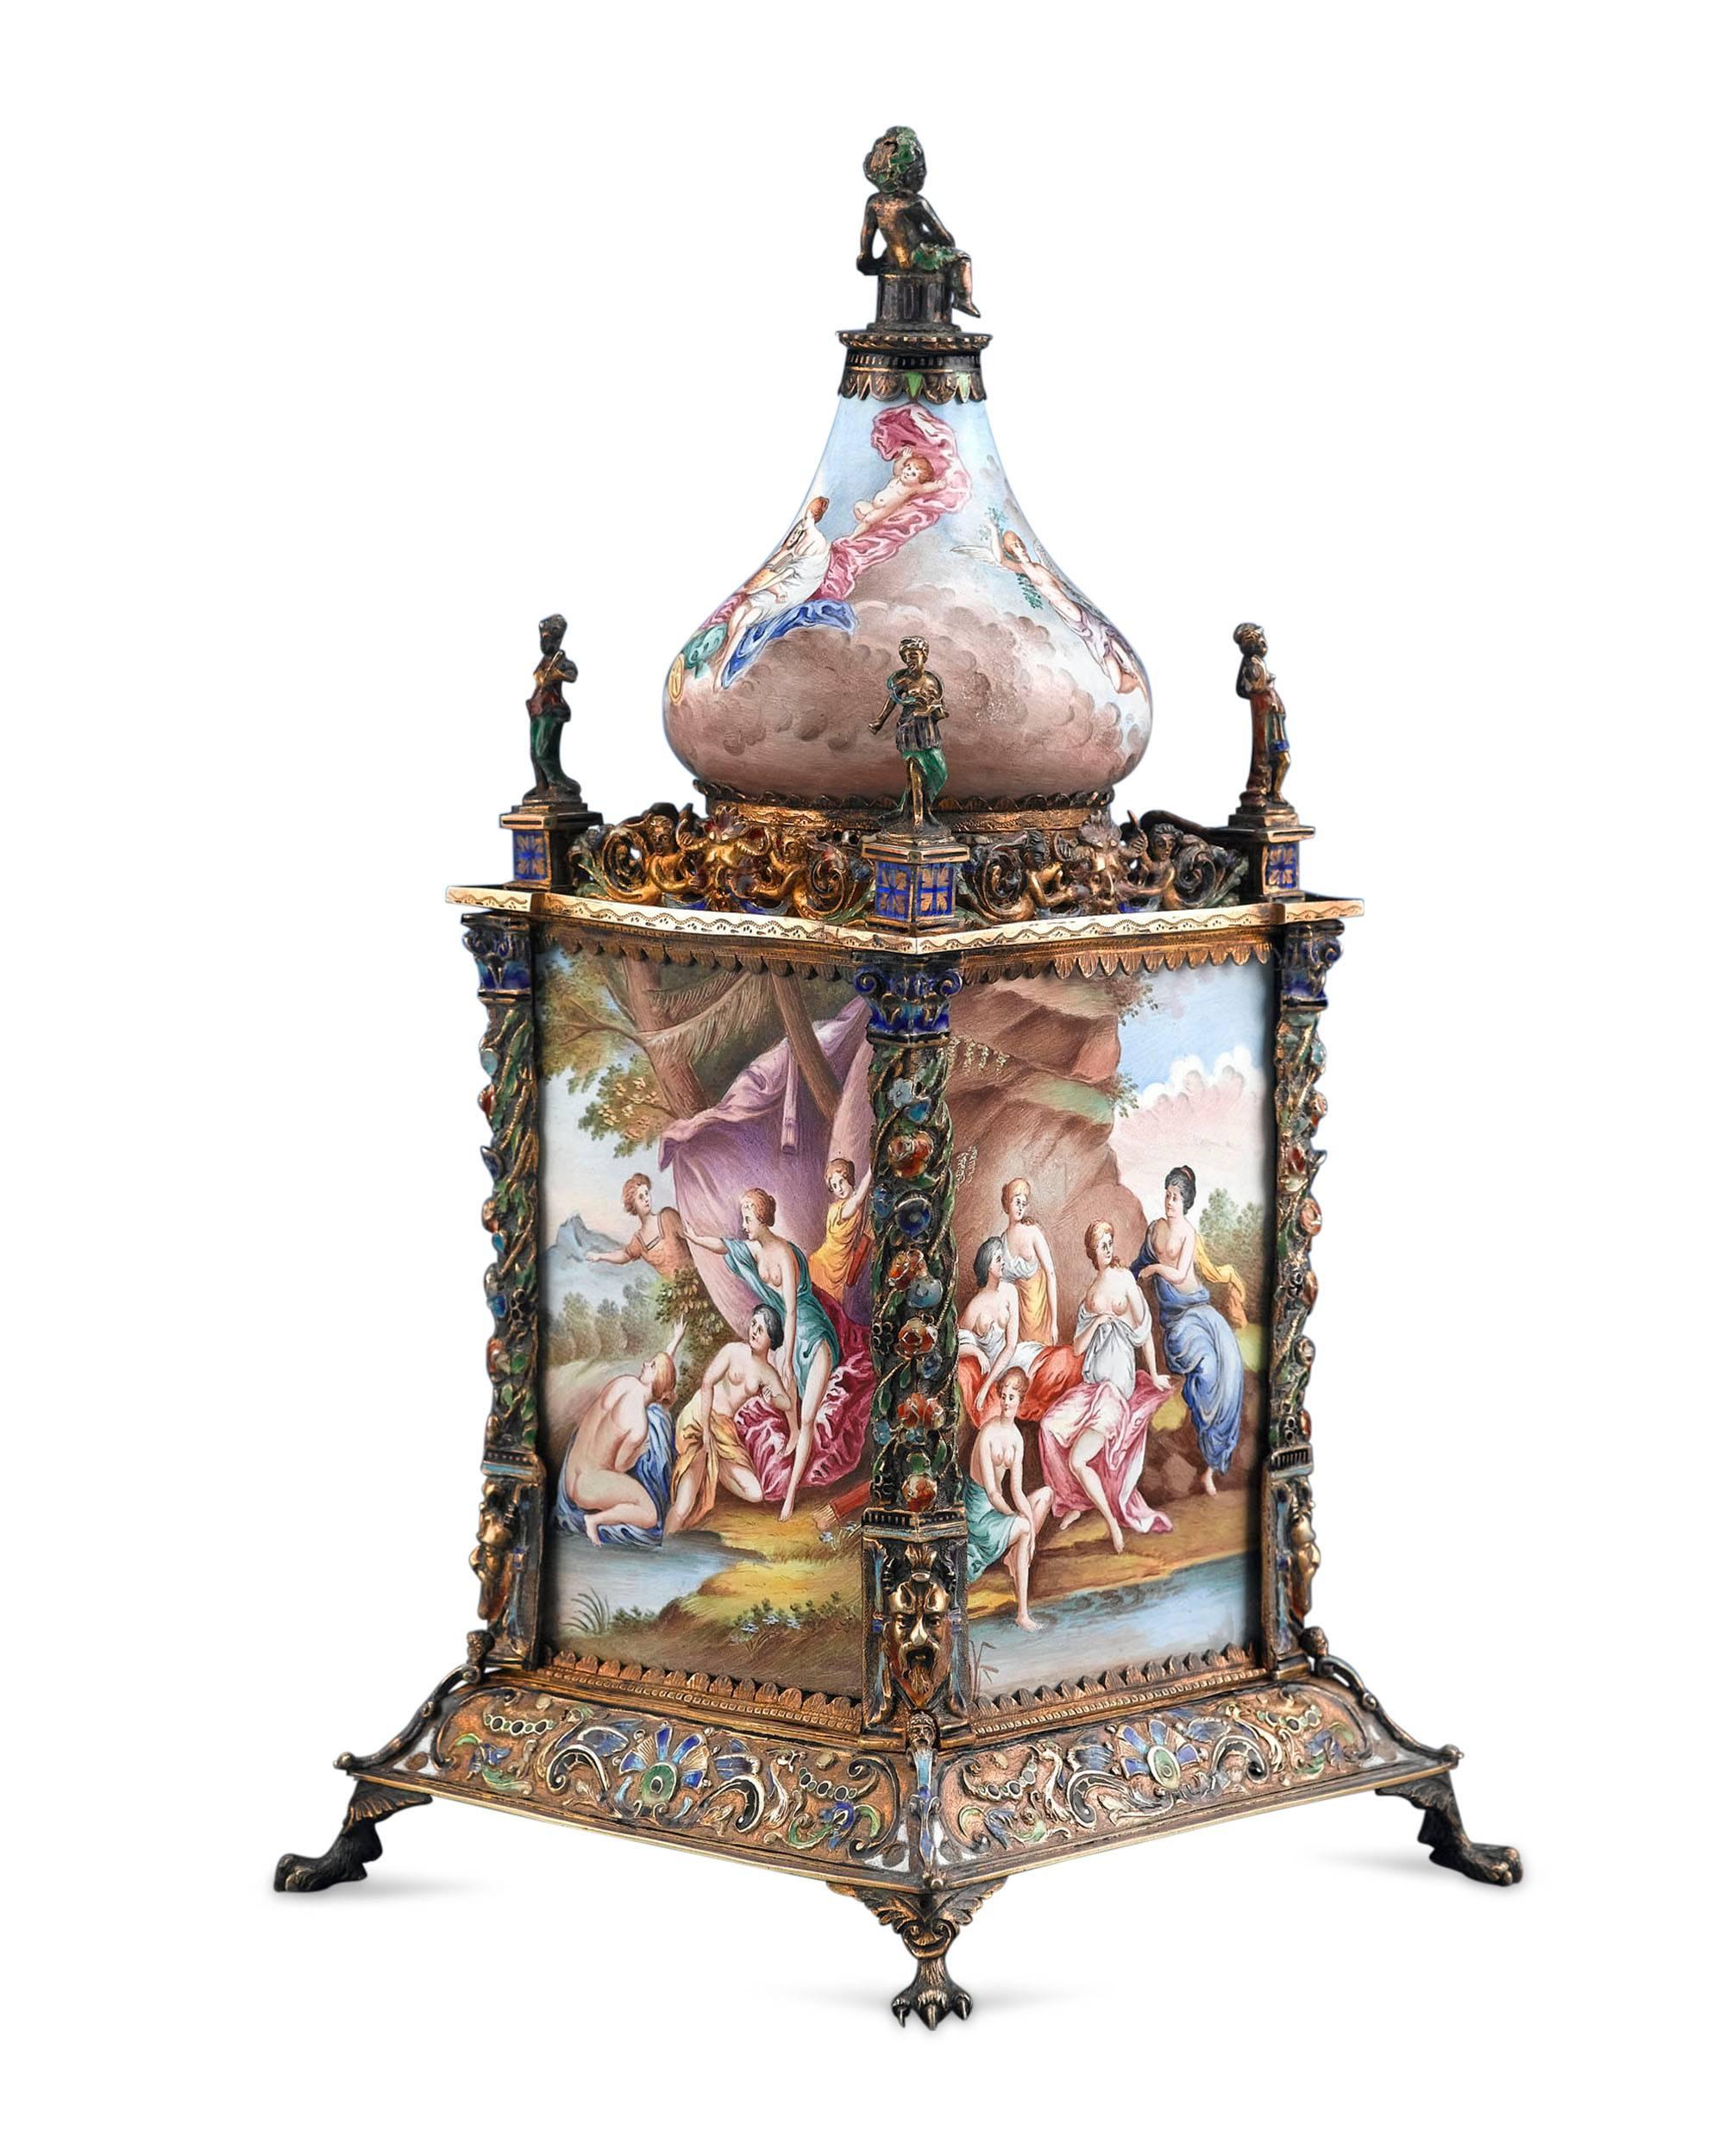 A small yet enormously captivating mantel clock decorated with the finest Viennese enamelwork to come out of the 19th century. A fantastic testament to the skilled artisans of Austria, this clock is decorated in the extremely labor intensive process